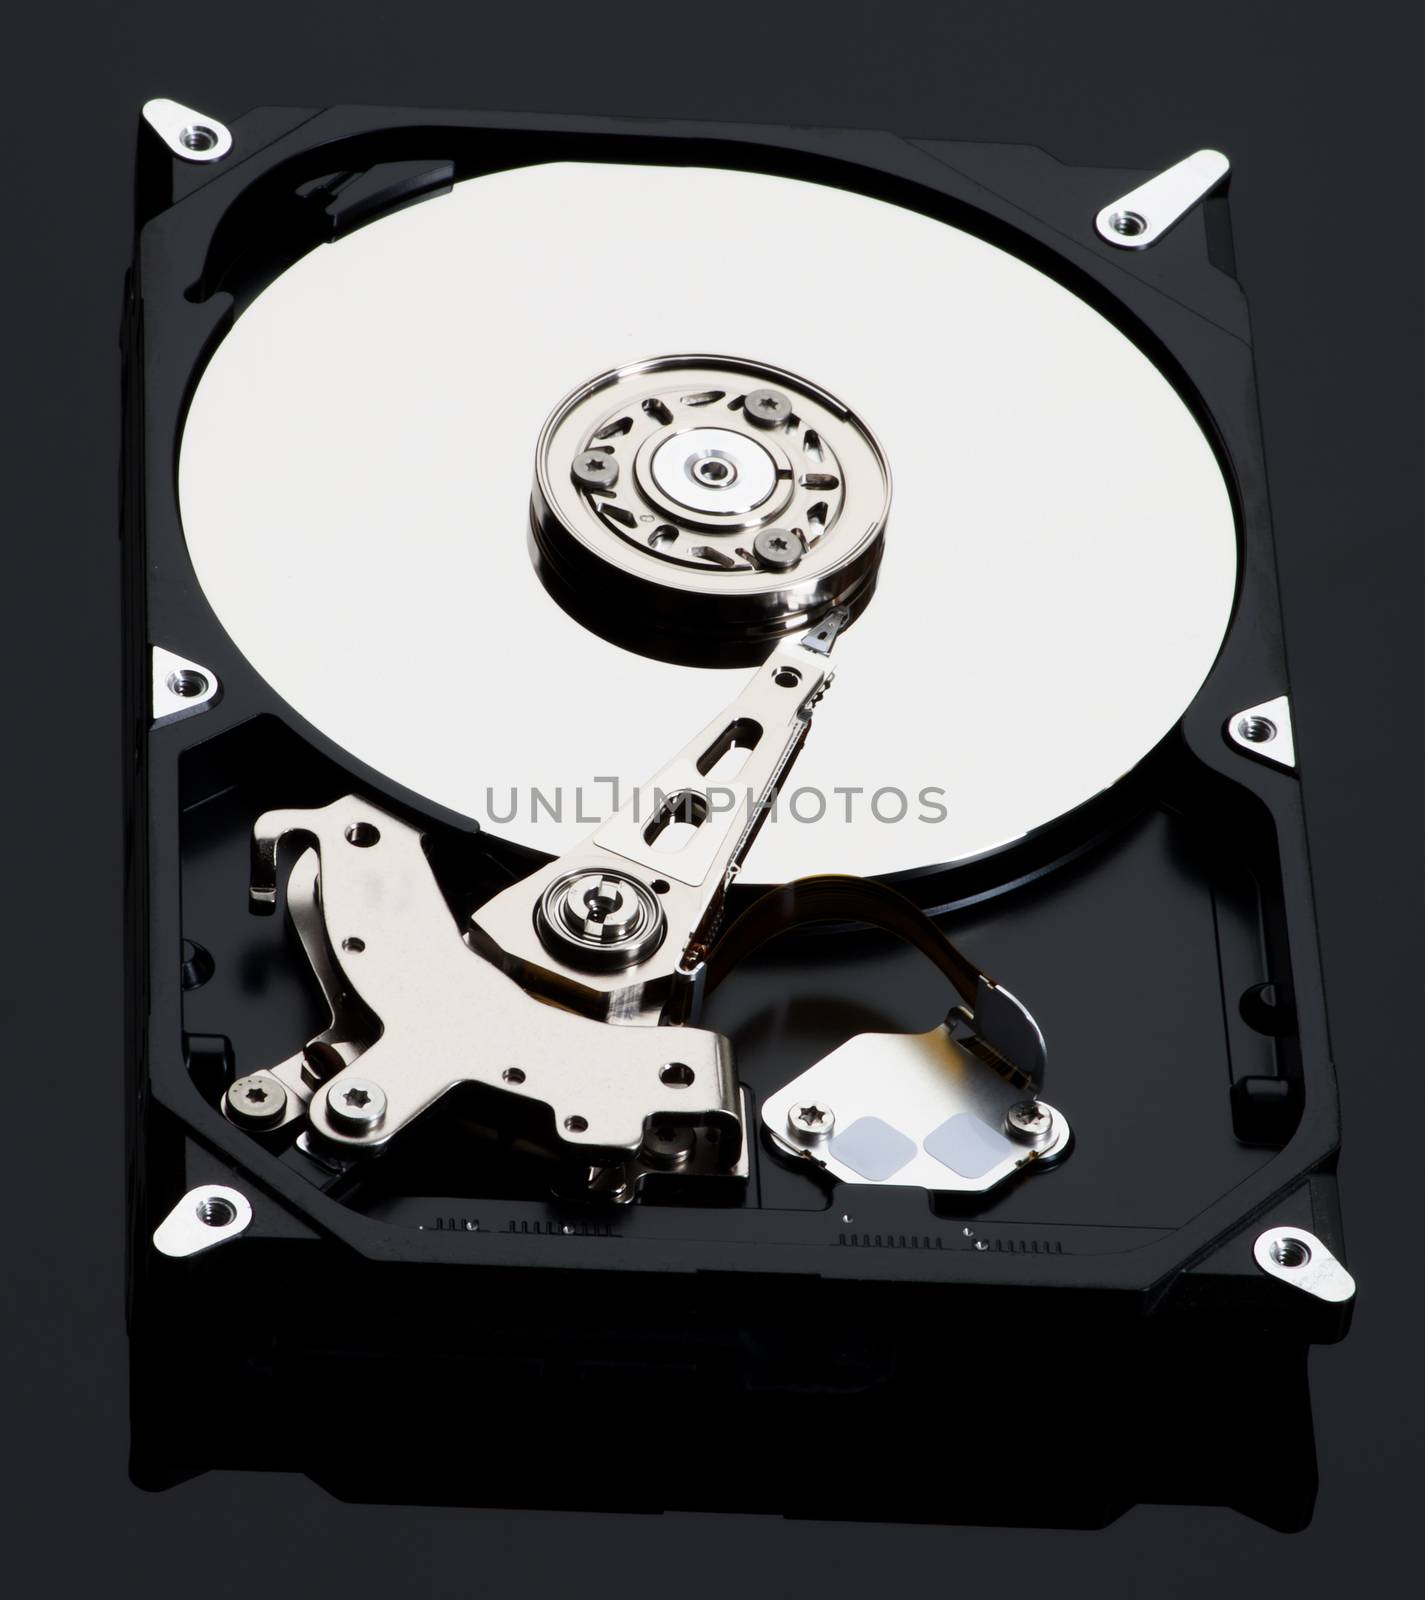 Opened Computer Hard Disk Drive isolated on Black background